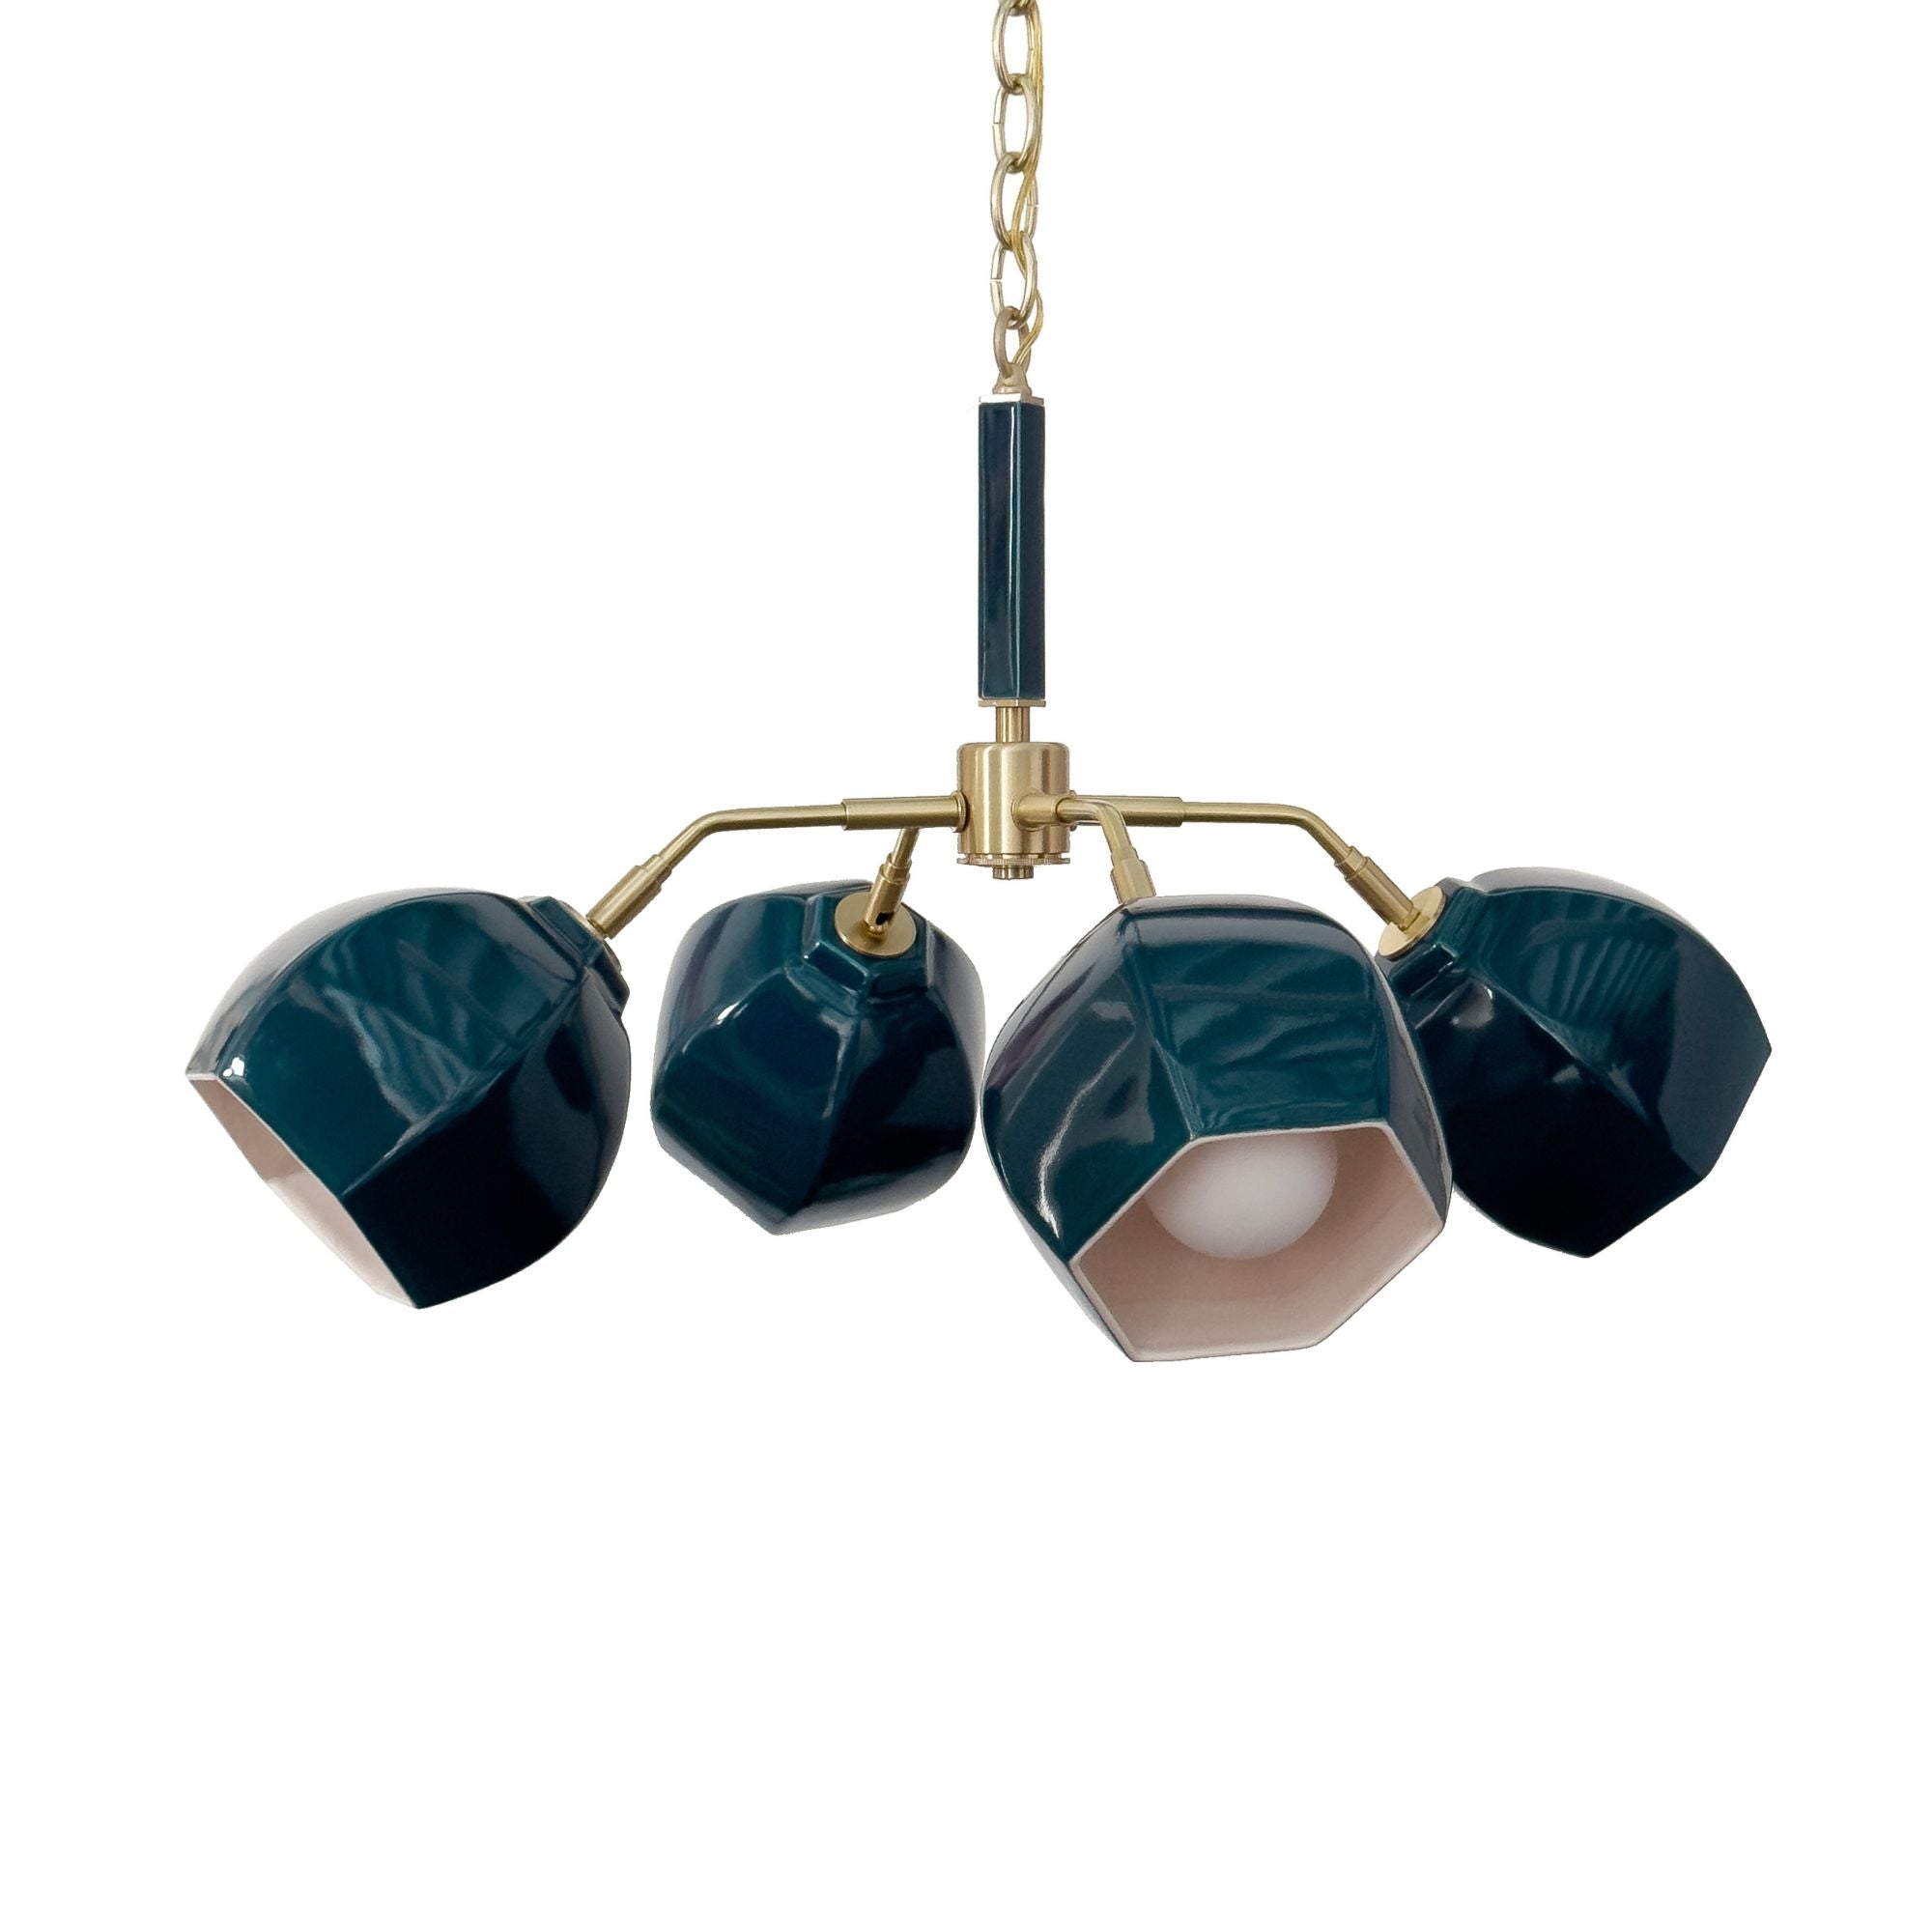 Barnacle Cluster Articulating Pendant in Teal with Hewn Brass